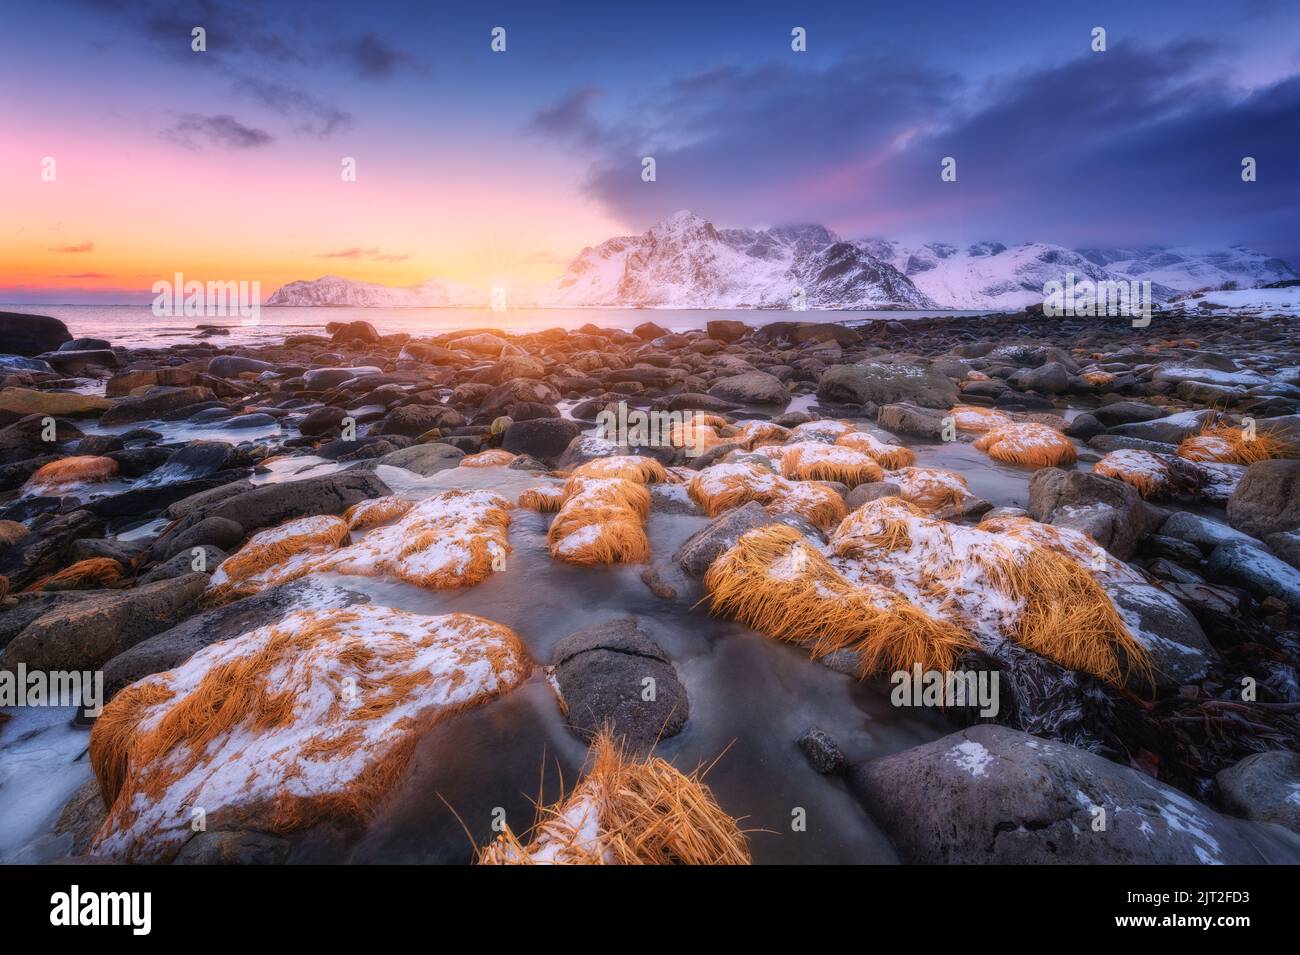 Stones with yellow grass in ice on the beach, snowy mountains Stock Photo